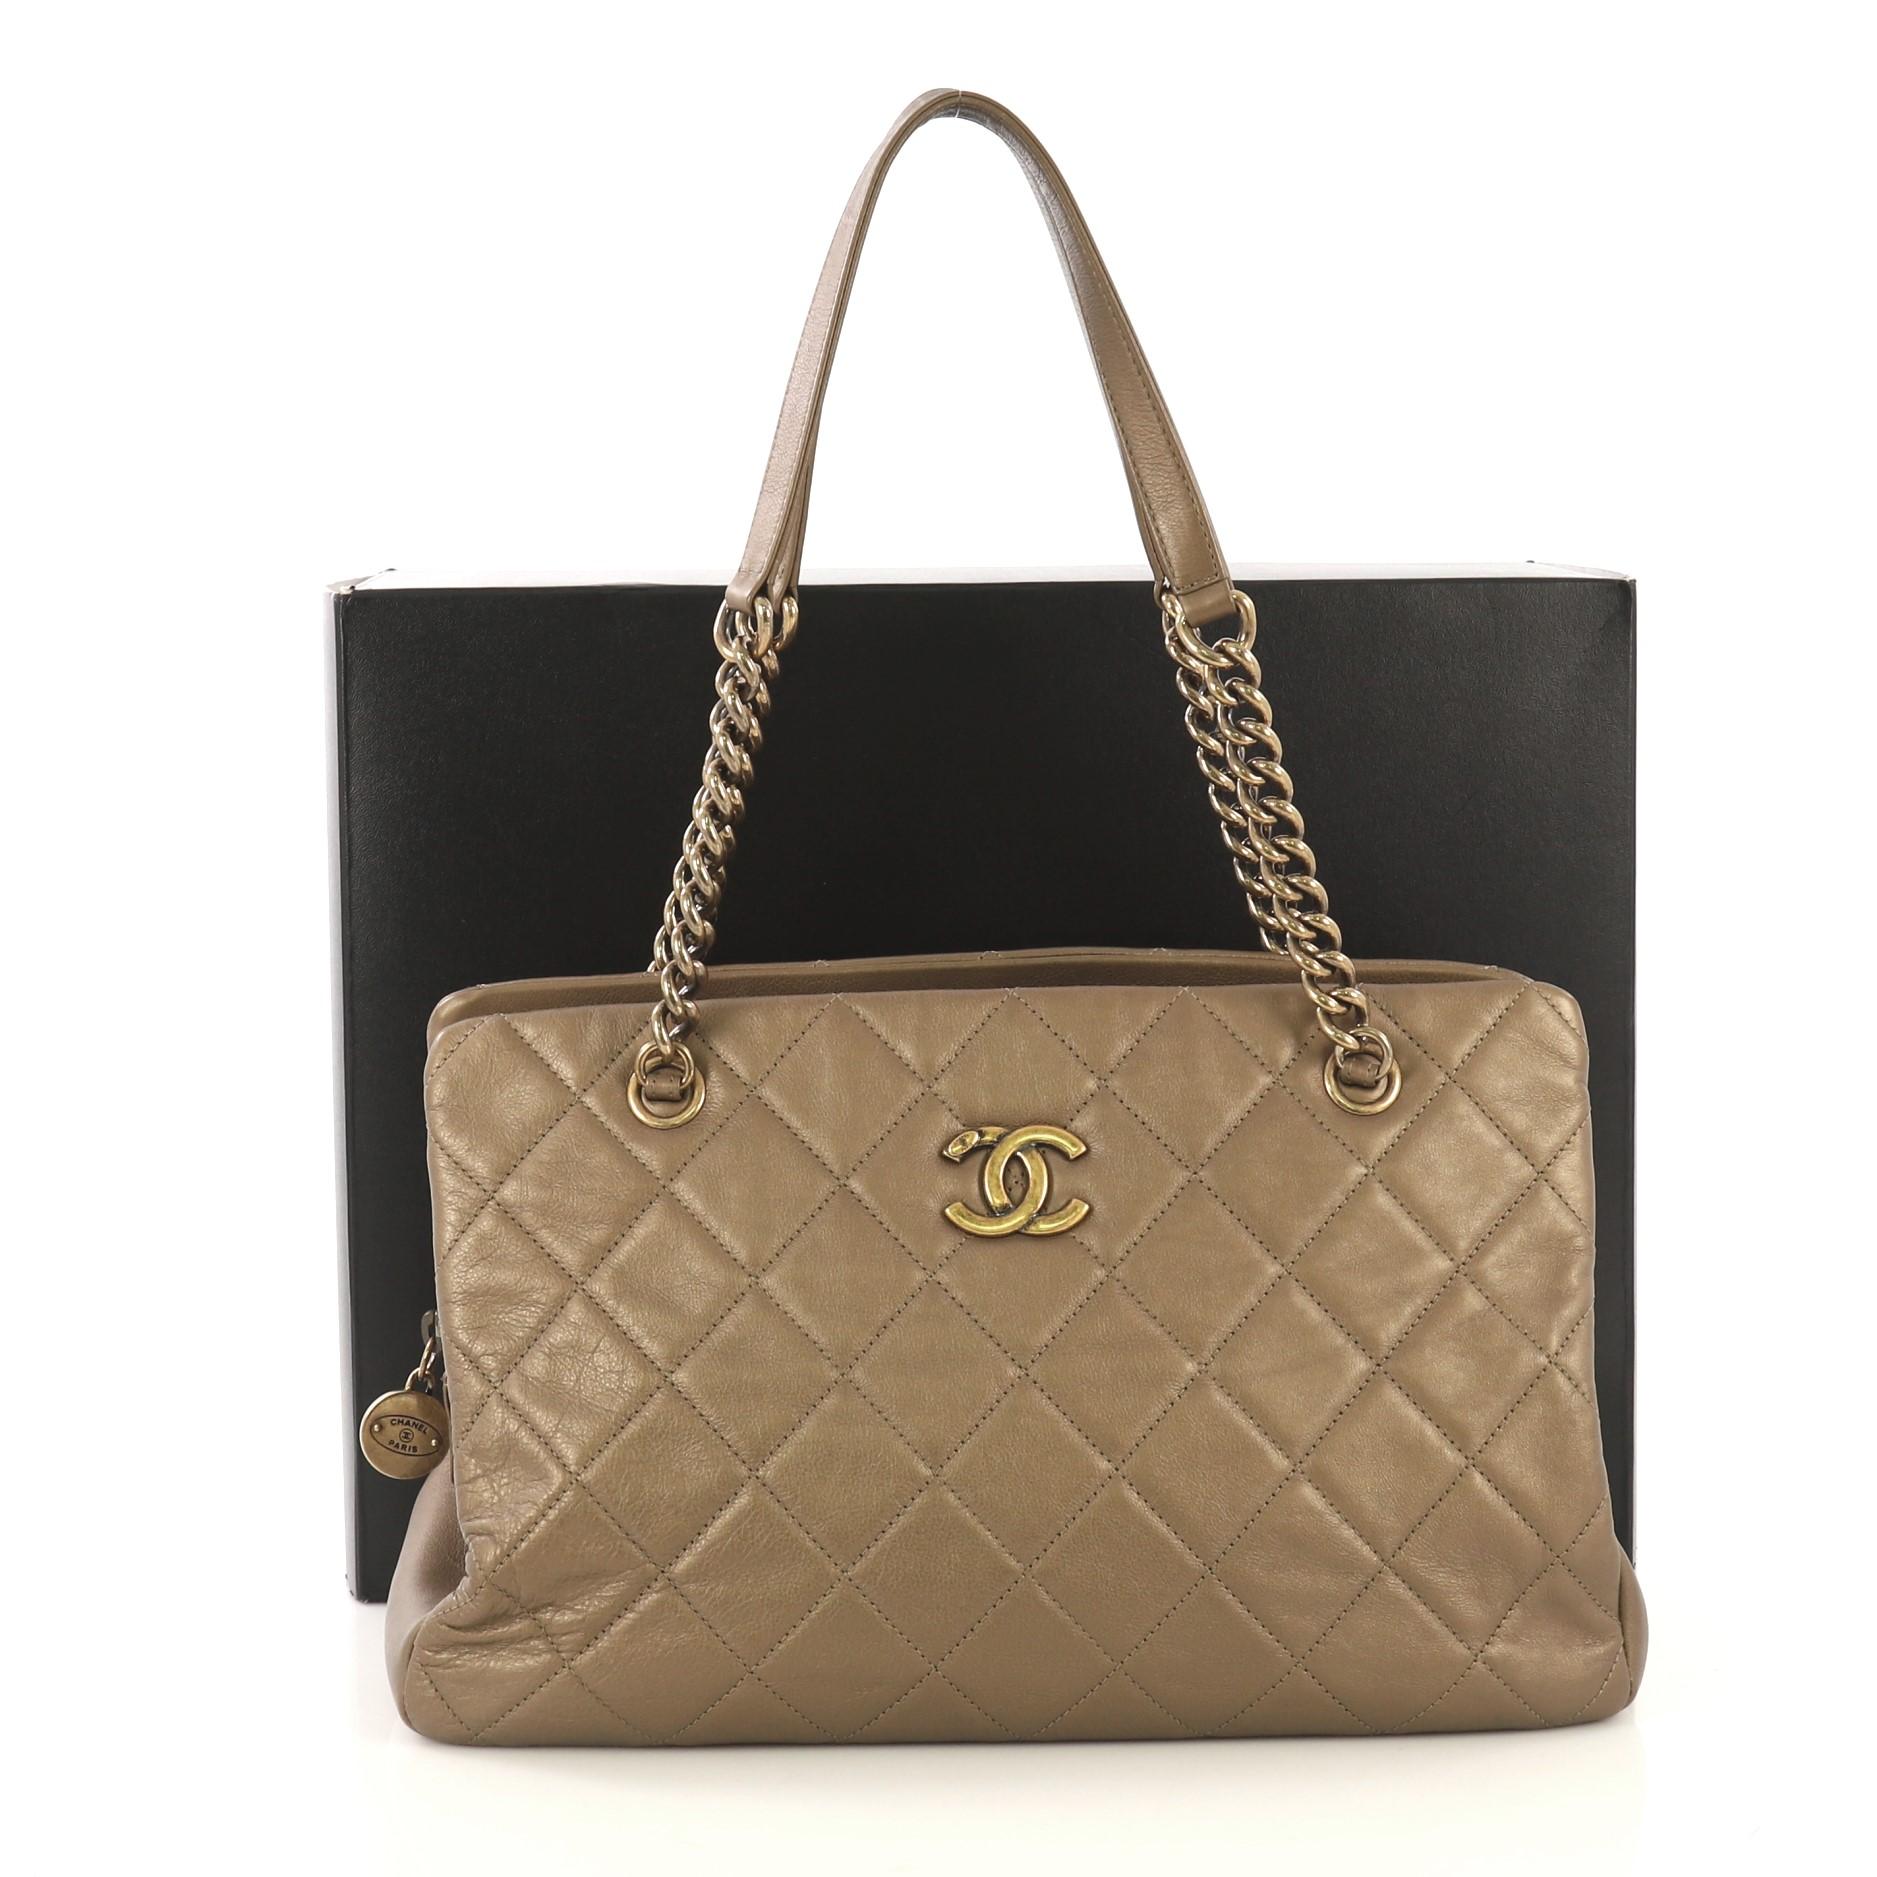 This Chanel CC Crown Tote Quilted Leather Medium, crafted from dark gold quilted leather, features chain straps with leather pads, protective base studs, and aged gold-tone hardware. It opens to a beige fabric interior divided into two open